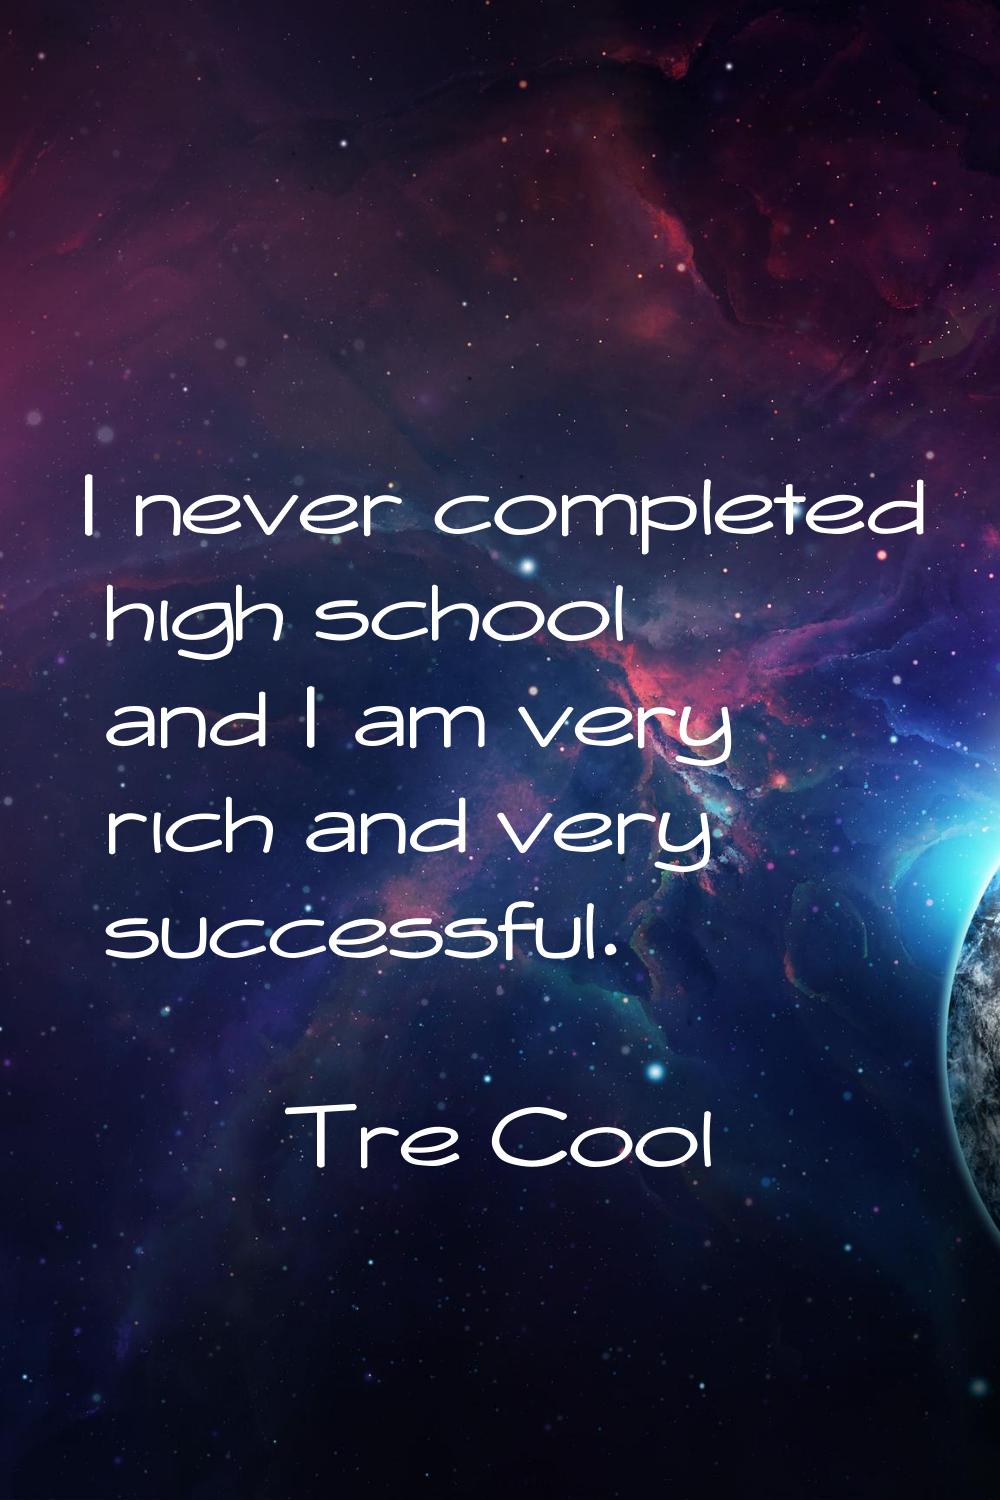 I never completed high school and I am very rich and very successful.